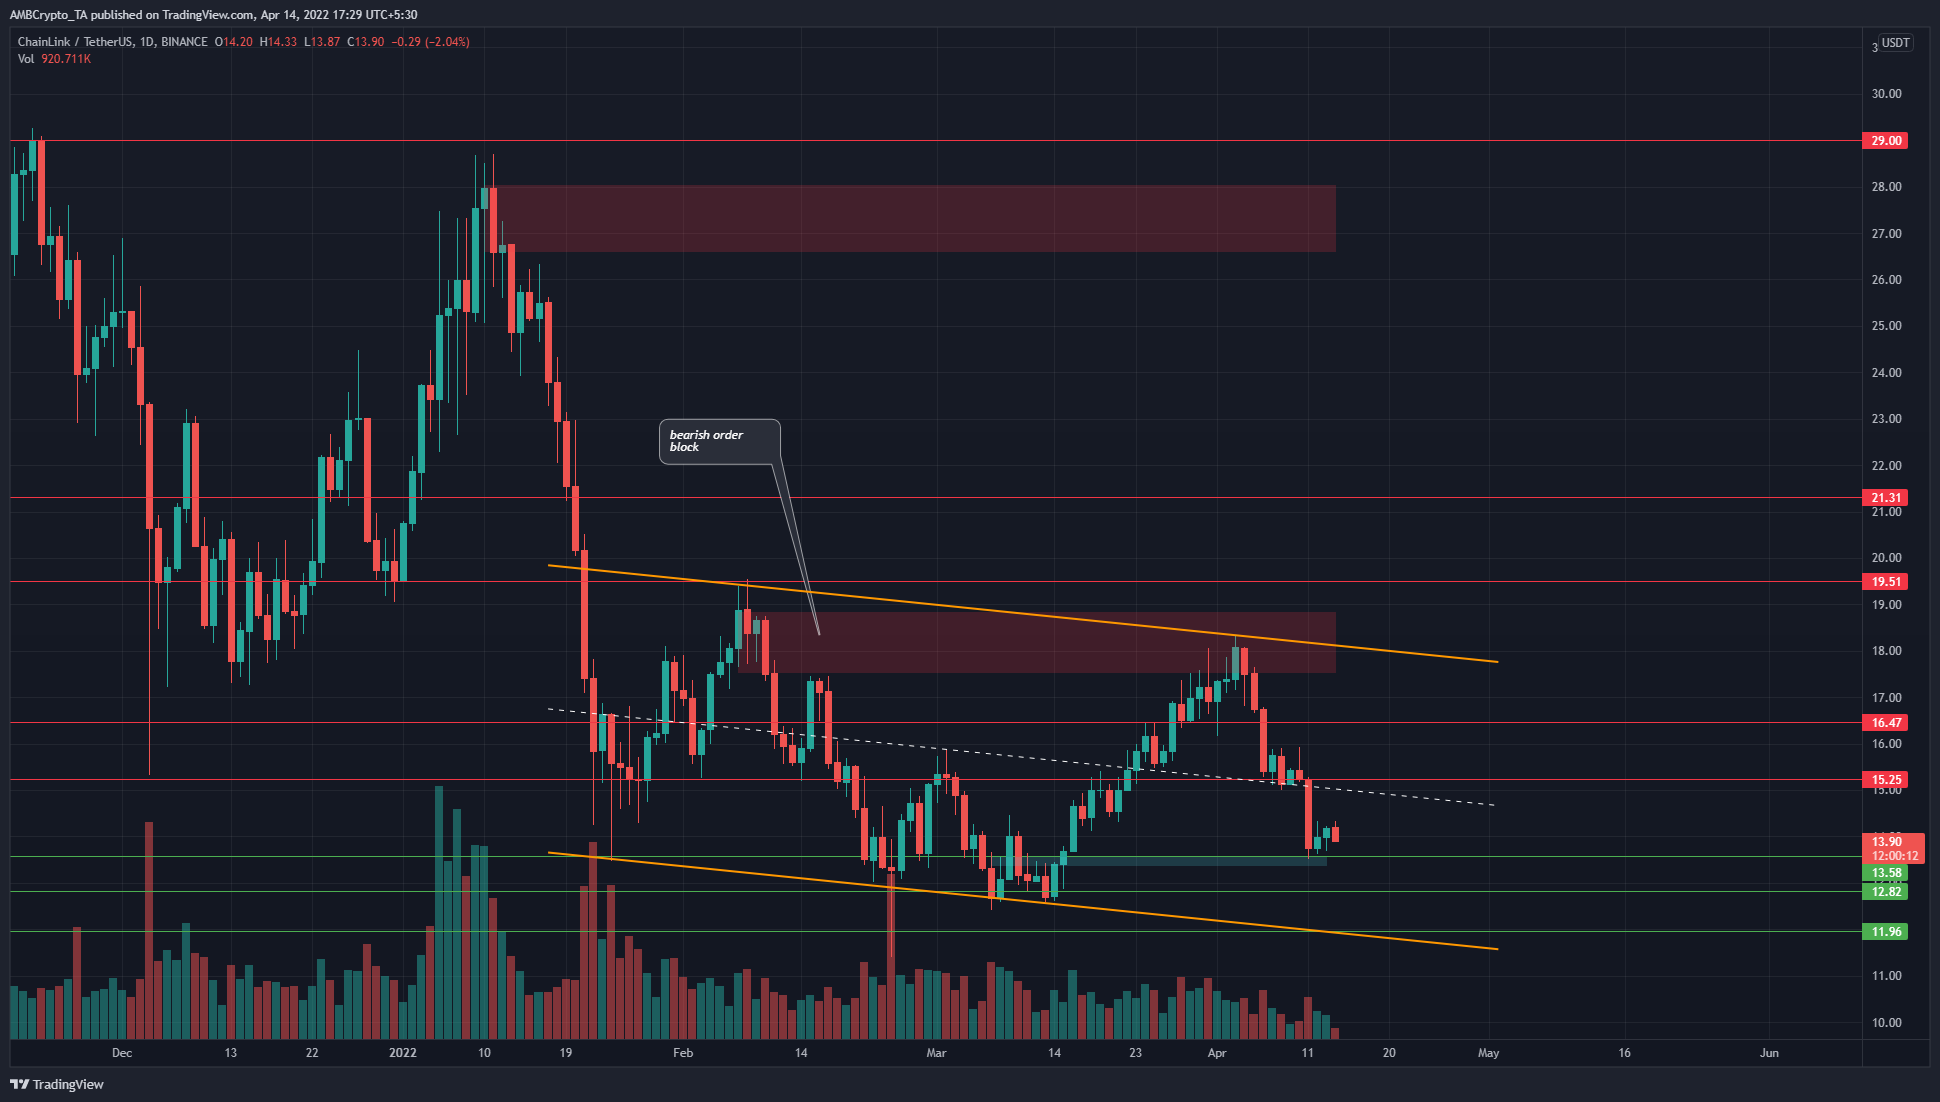 Chainlink has a longer-term bearish structure, watch out for a bullish reaction at these levels